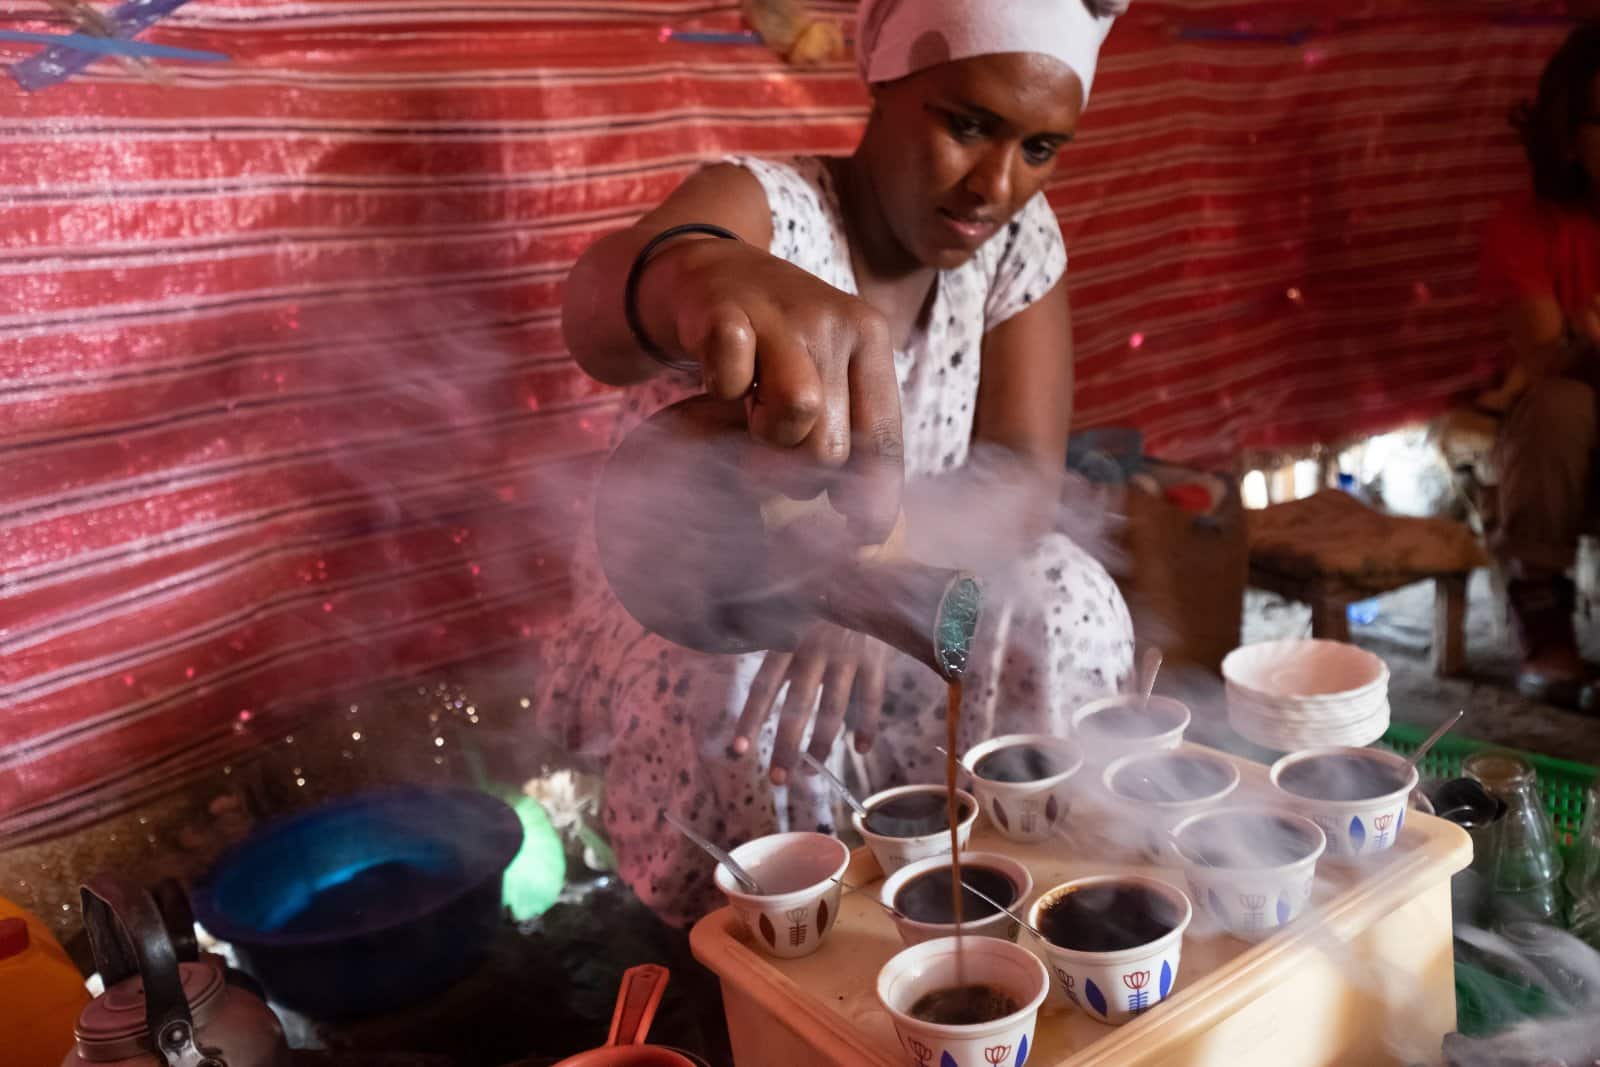 <p><span>Ethiopia, often regarded as the birthplace of coffee, offers a coffee experience rooted in tradition and ceremony. In Addis Ababa, the Ethiopian coffee ceremony is essential to social life.</span></p> <p><span>The process involves washing, roasting, grinding, and brewing the beans in a single session, often accompanied by the burning of incense. This ritual is a true embodiment of Ethiopian hospitality and communal spirit.</span></p> <p><b>Insider’s Tip: </b><span>Participate in a traditional coffee ceremony at a local establishment for an authentic experience.</span></p> <p><b>When To Travel: </b><span>Visit from October to June for the best weather.</span></p> <p><b>How To Get There: </b><span>Fly into Addis Ababa Bole International Airport, which is well connected to the city.</span></p>